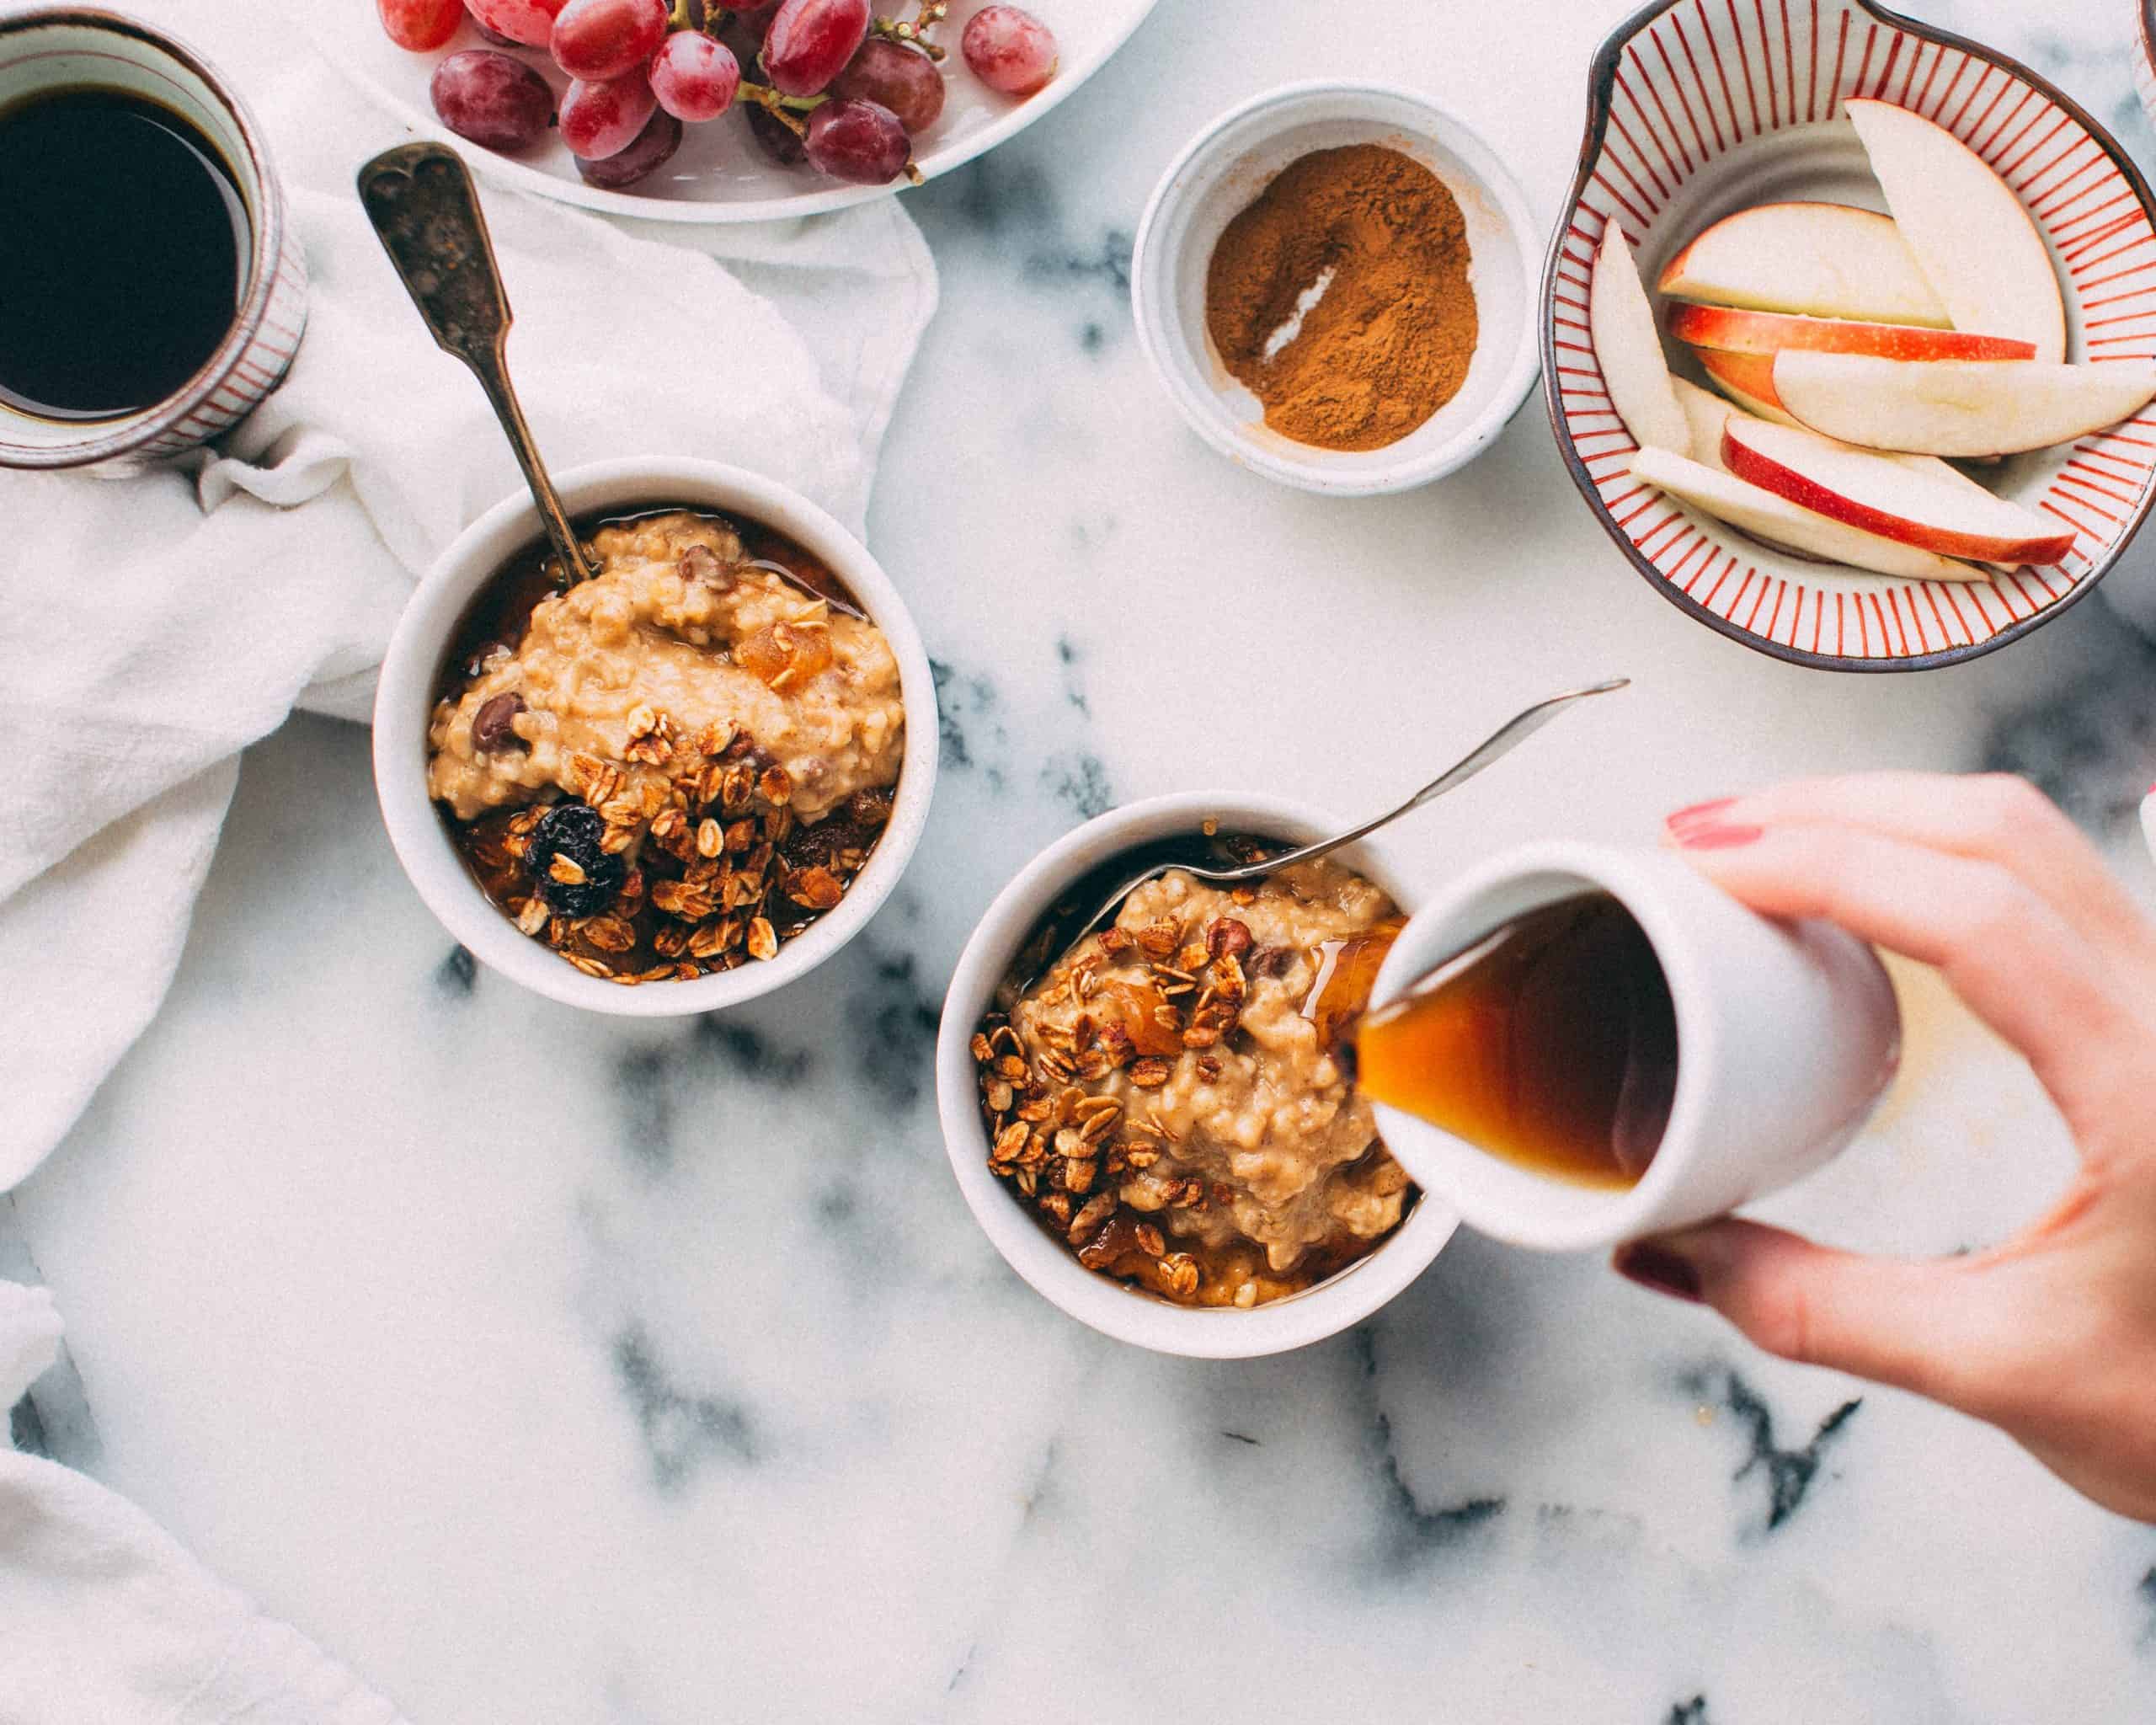 Maple Syrup Breakfast with Granola and Yogurt